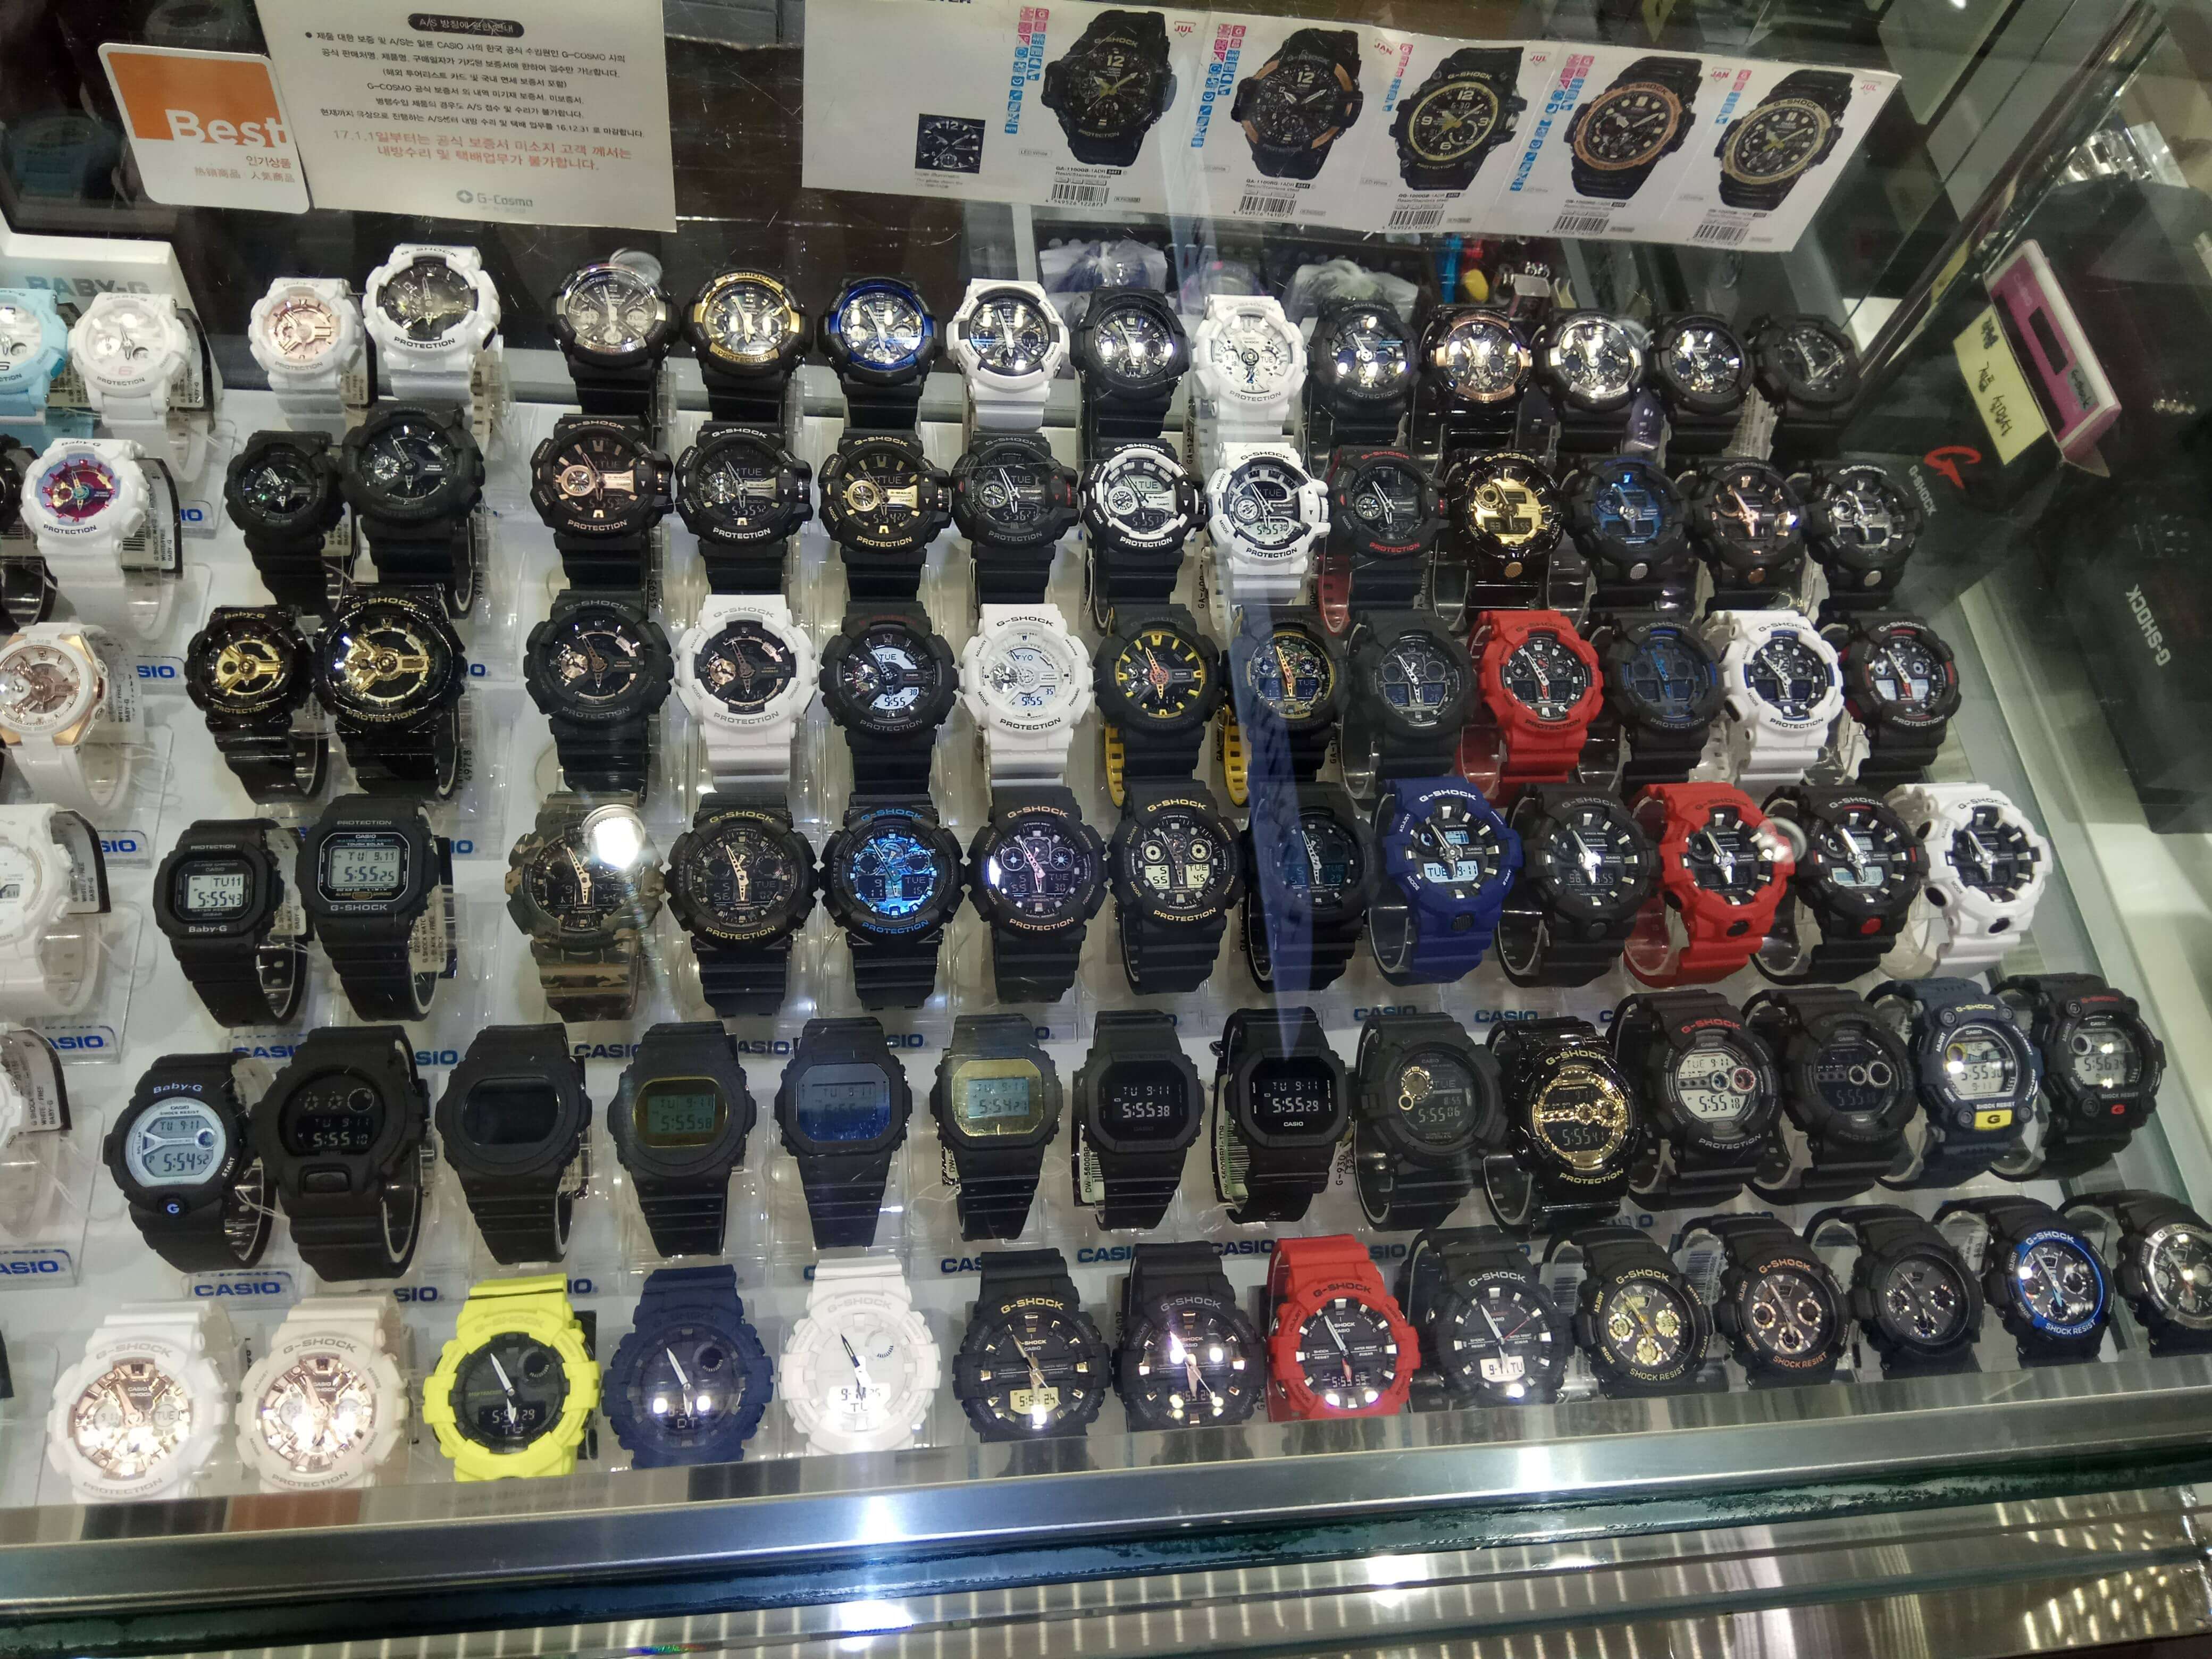 G-Shock and Baby-G Shopping in Incheon 